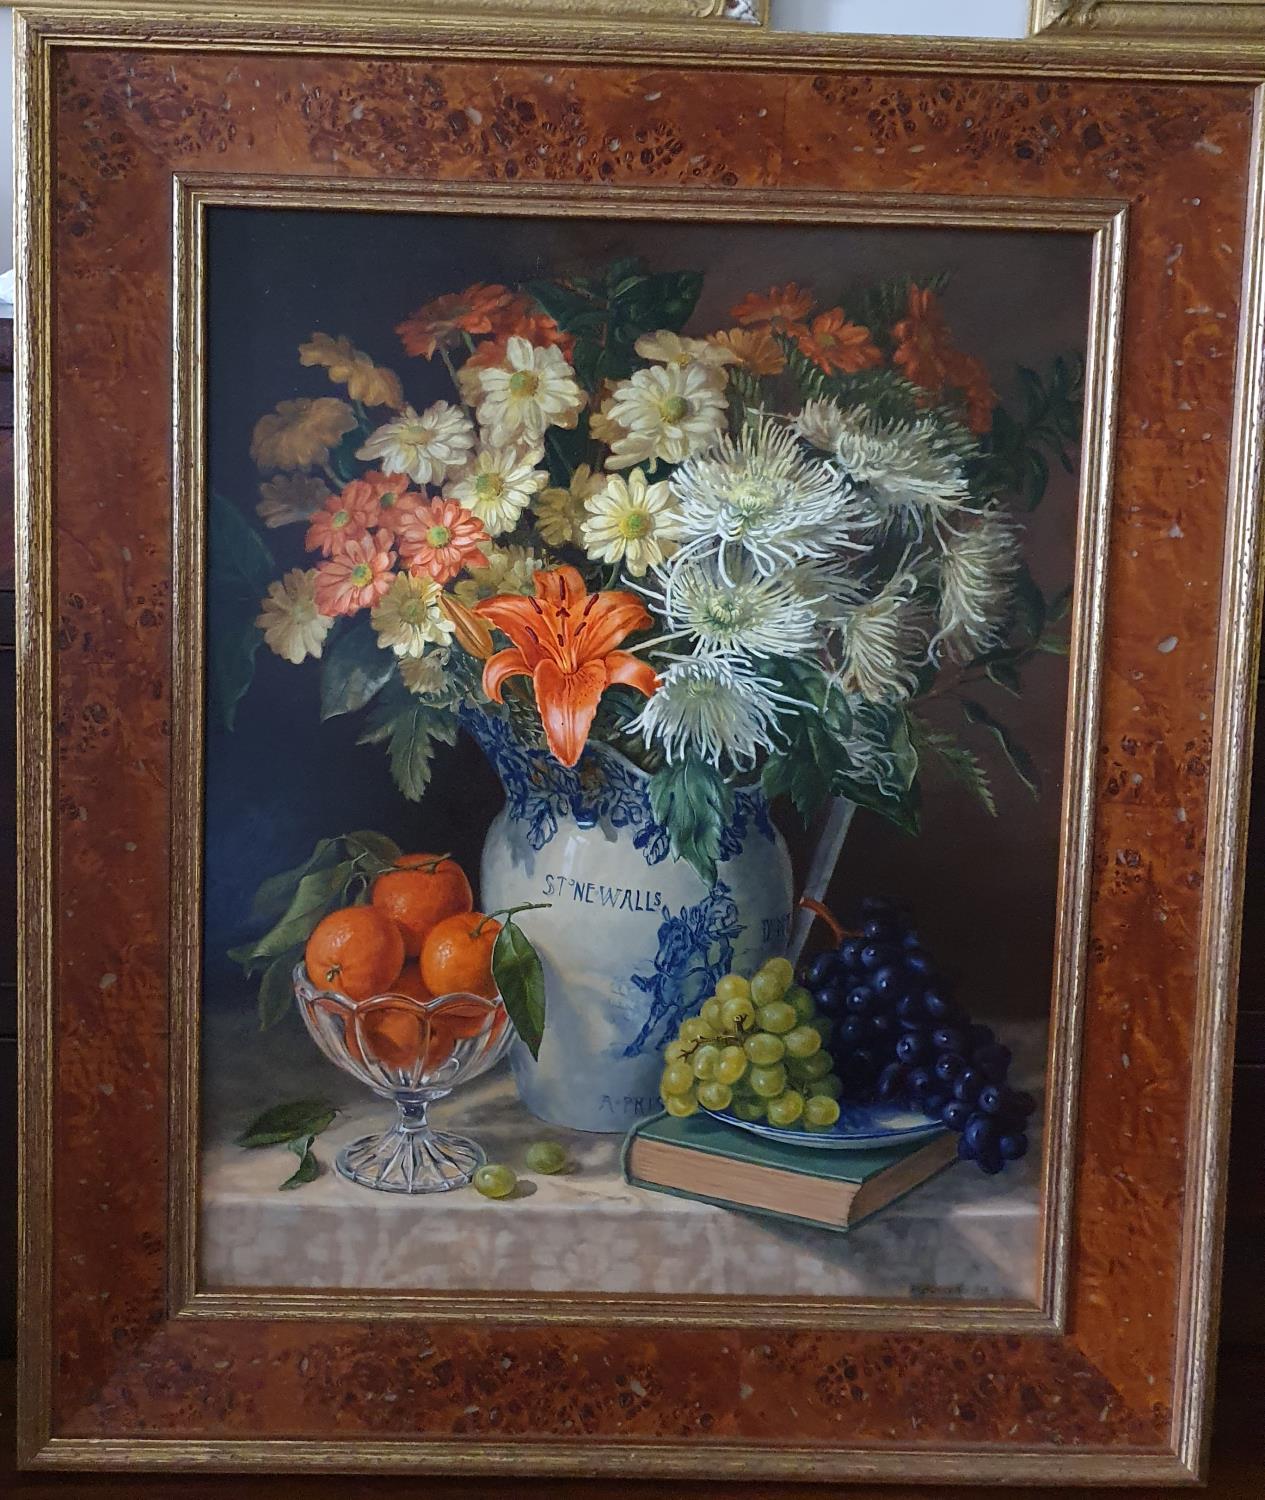 Diane Branscombe 20th Century. An Oil on Board still life with Flowers and fruit. Signed and dated